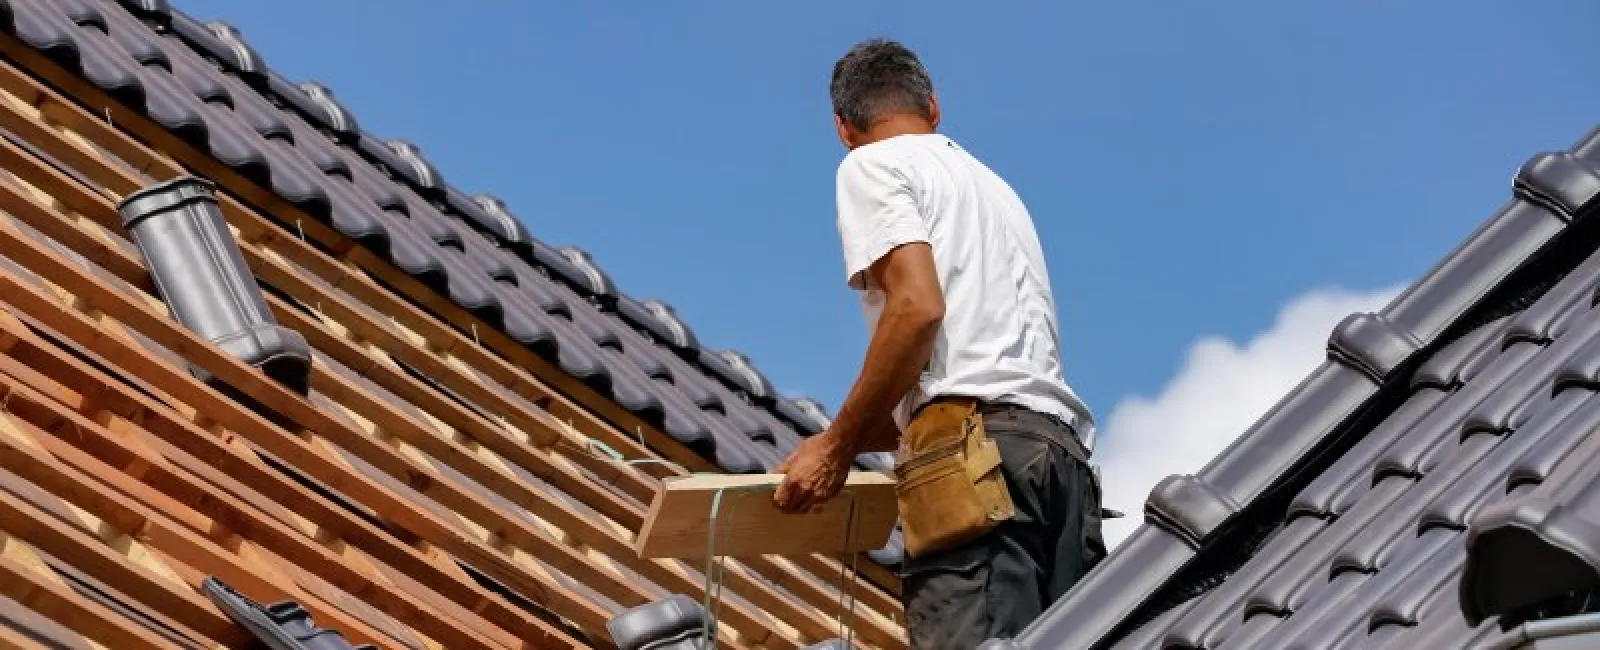 Things to Look for in Roofing When Buying a Home